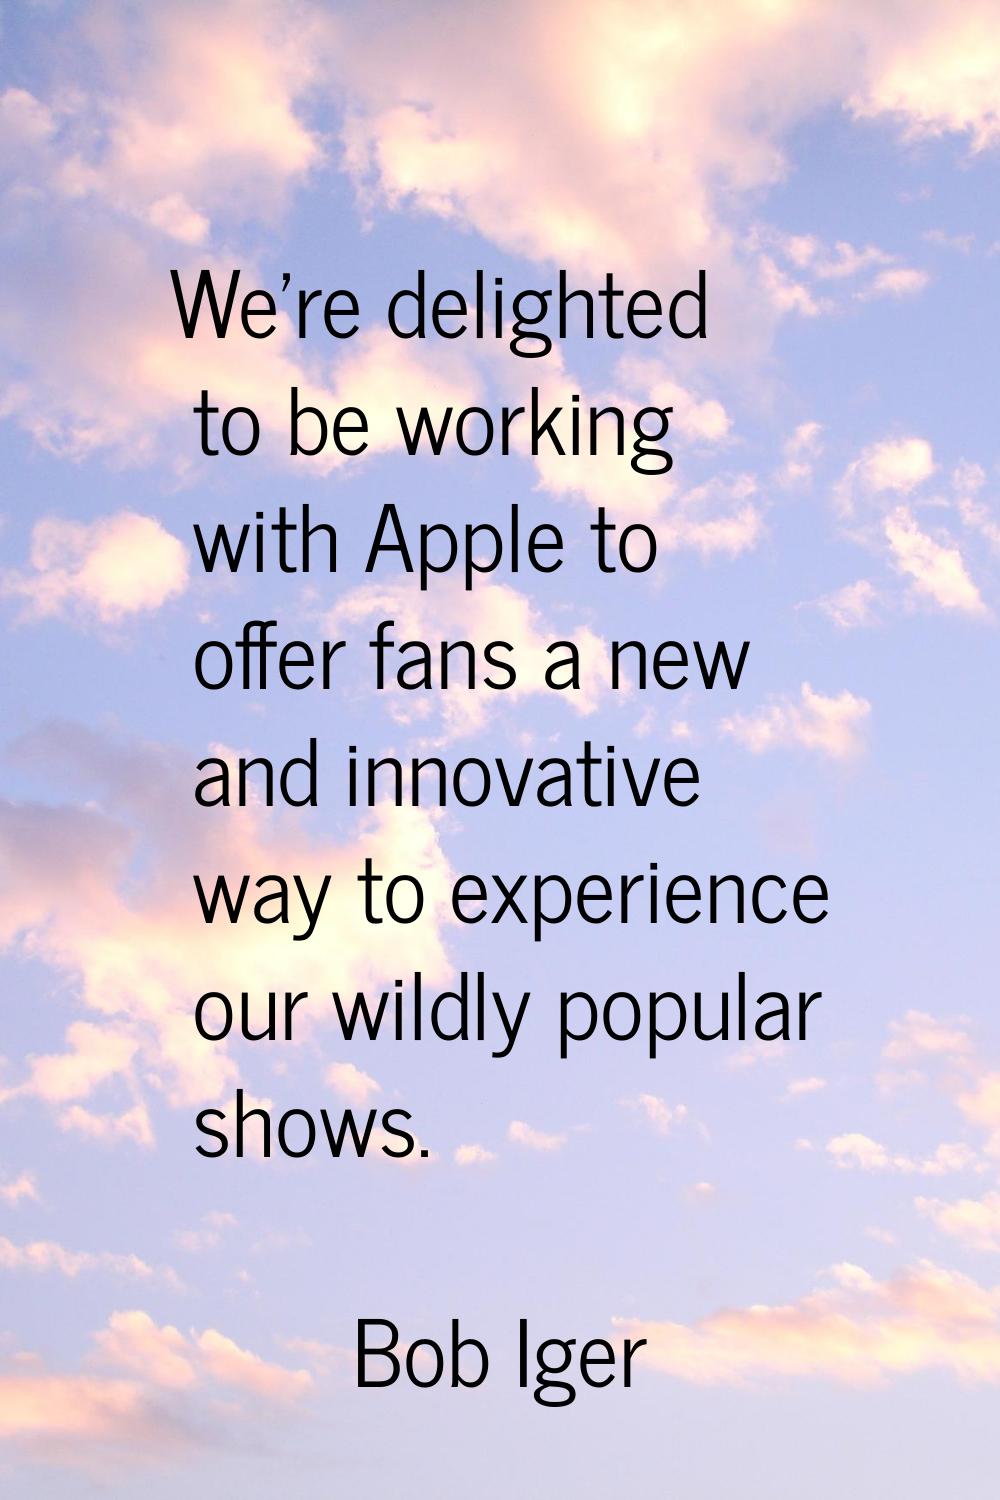 We're delighted to be working with Apple to offer fans a new and innovative way to experience our w